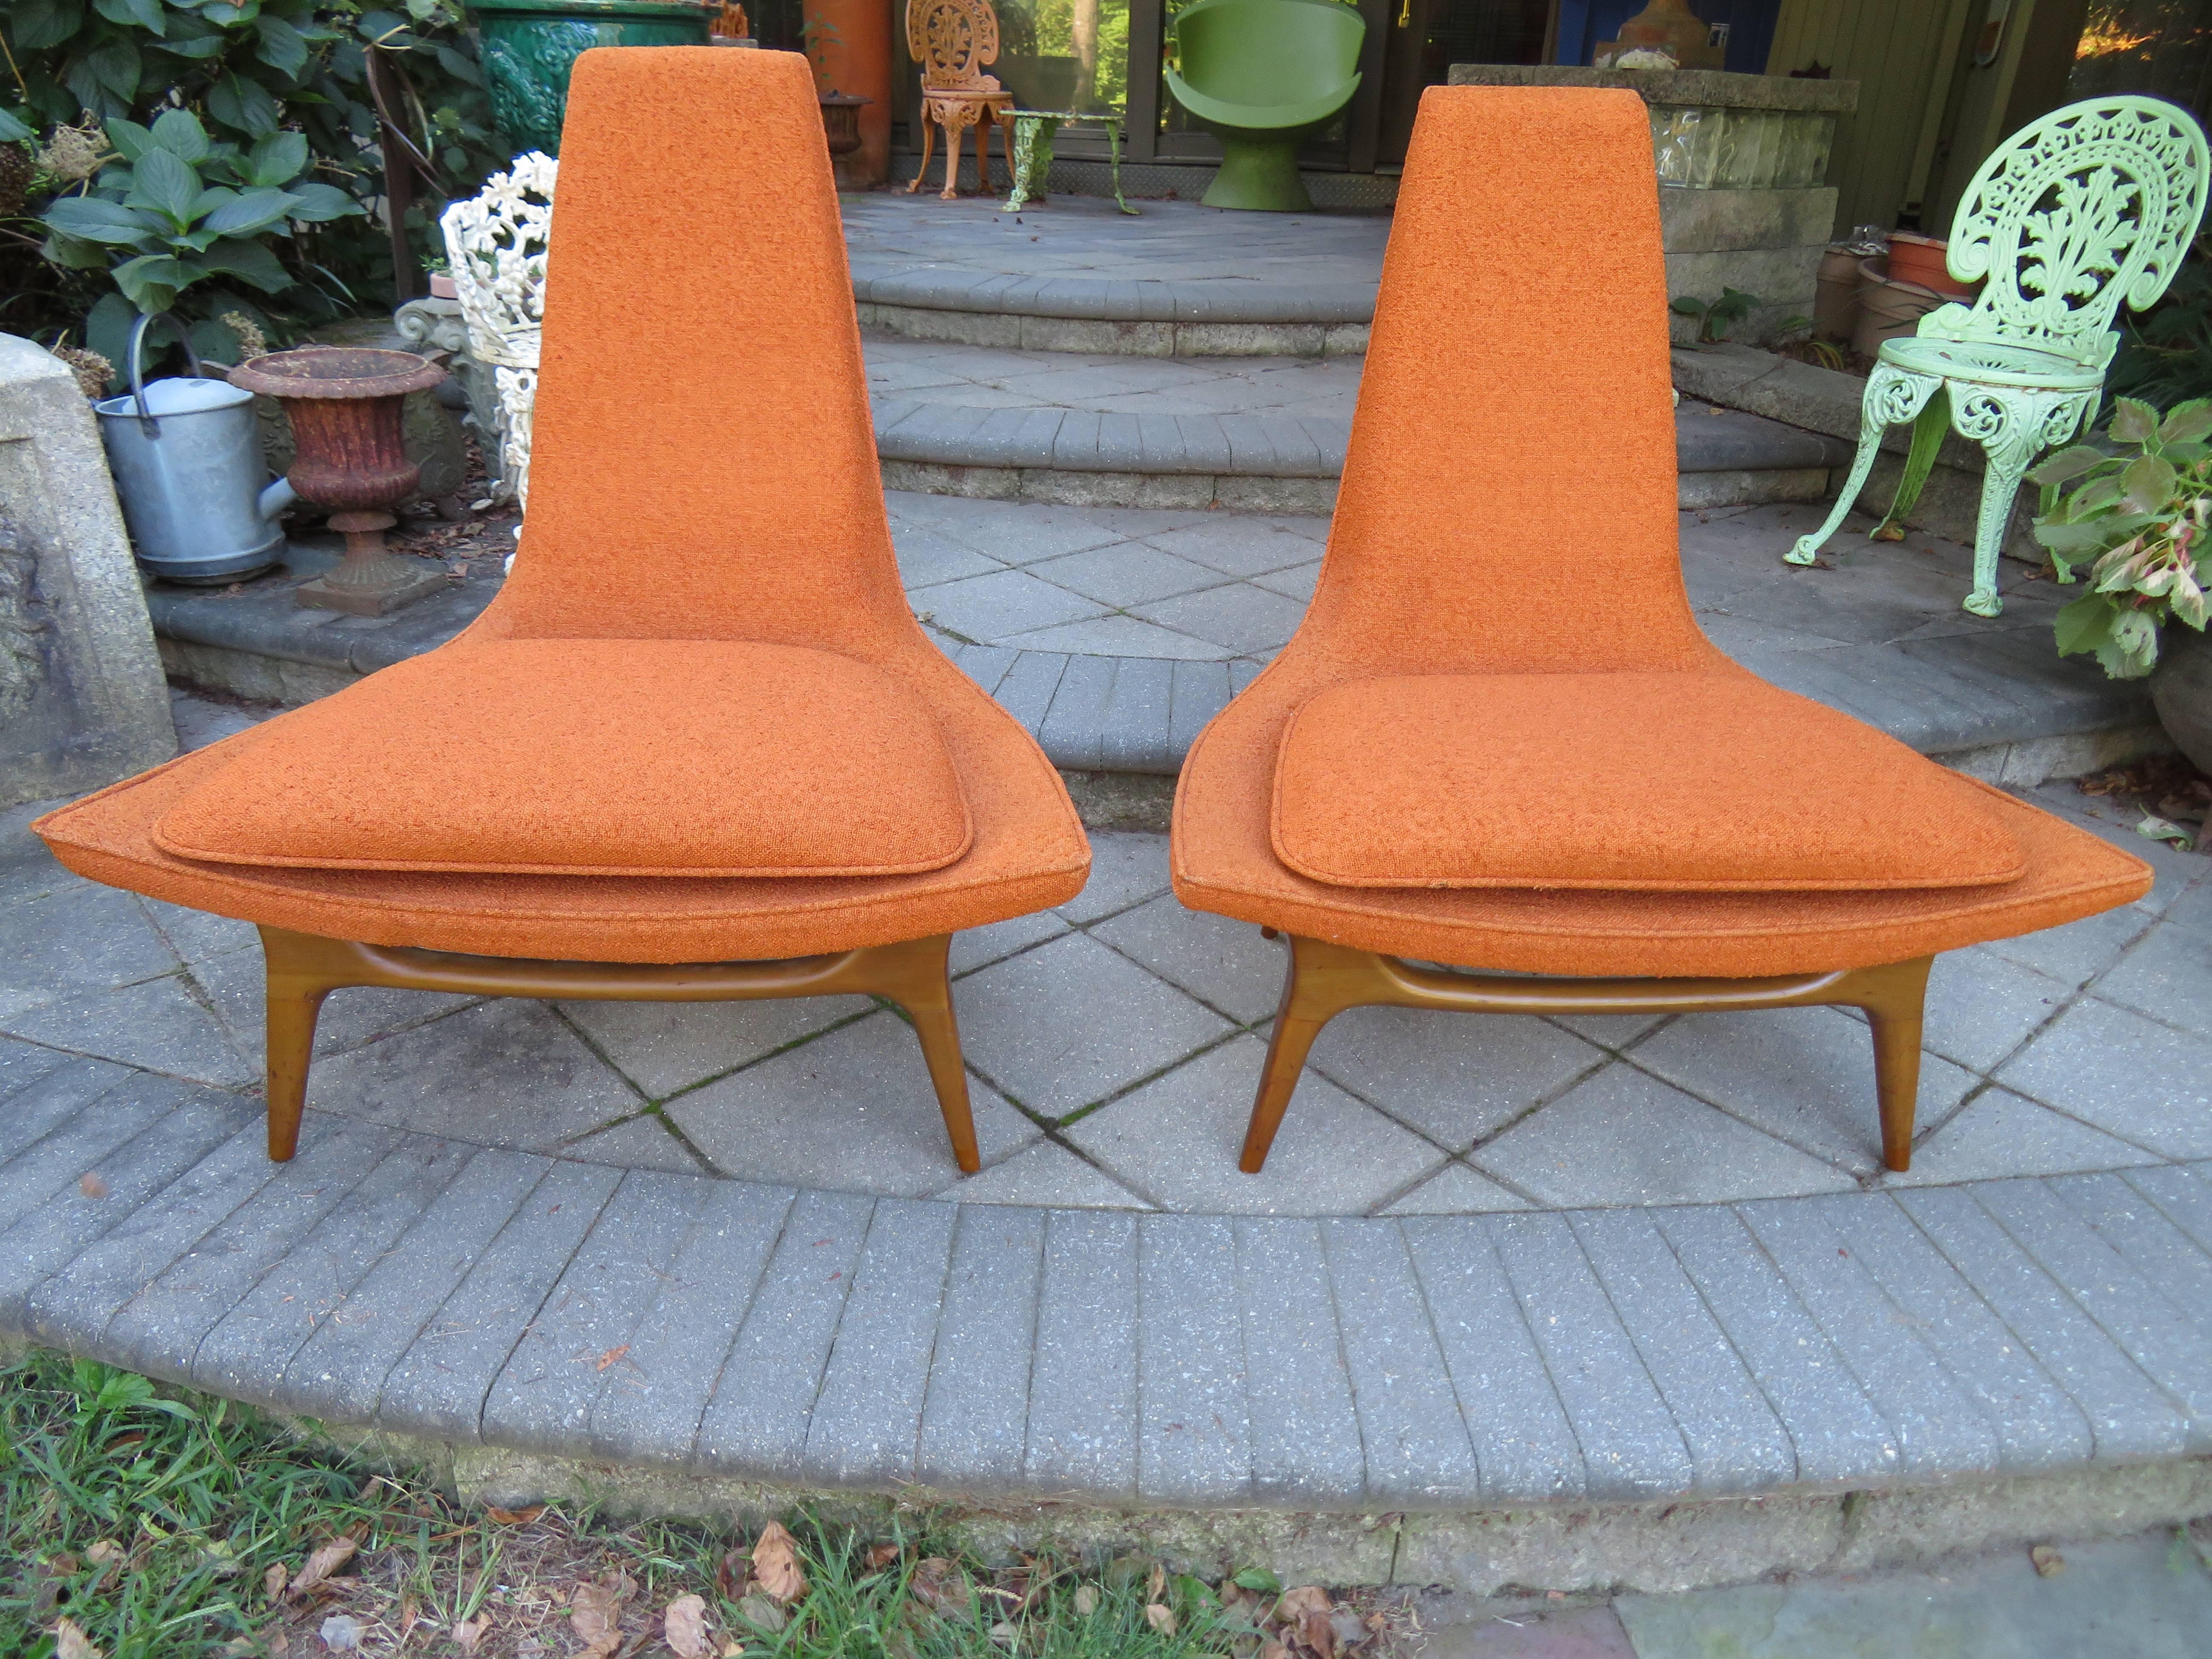 Sculptural pair of lounge chairs by Karpen, circa early 1950s. These lovely examples have subtly curved seats and tall tapered backs with beautifully formed light walnut stained legs. This pair retain their original fabric in lovely condition-a few